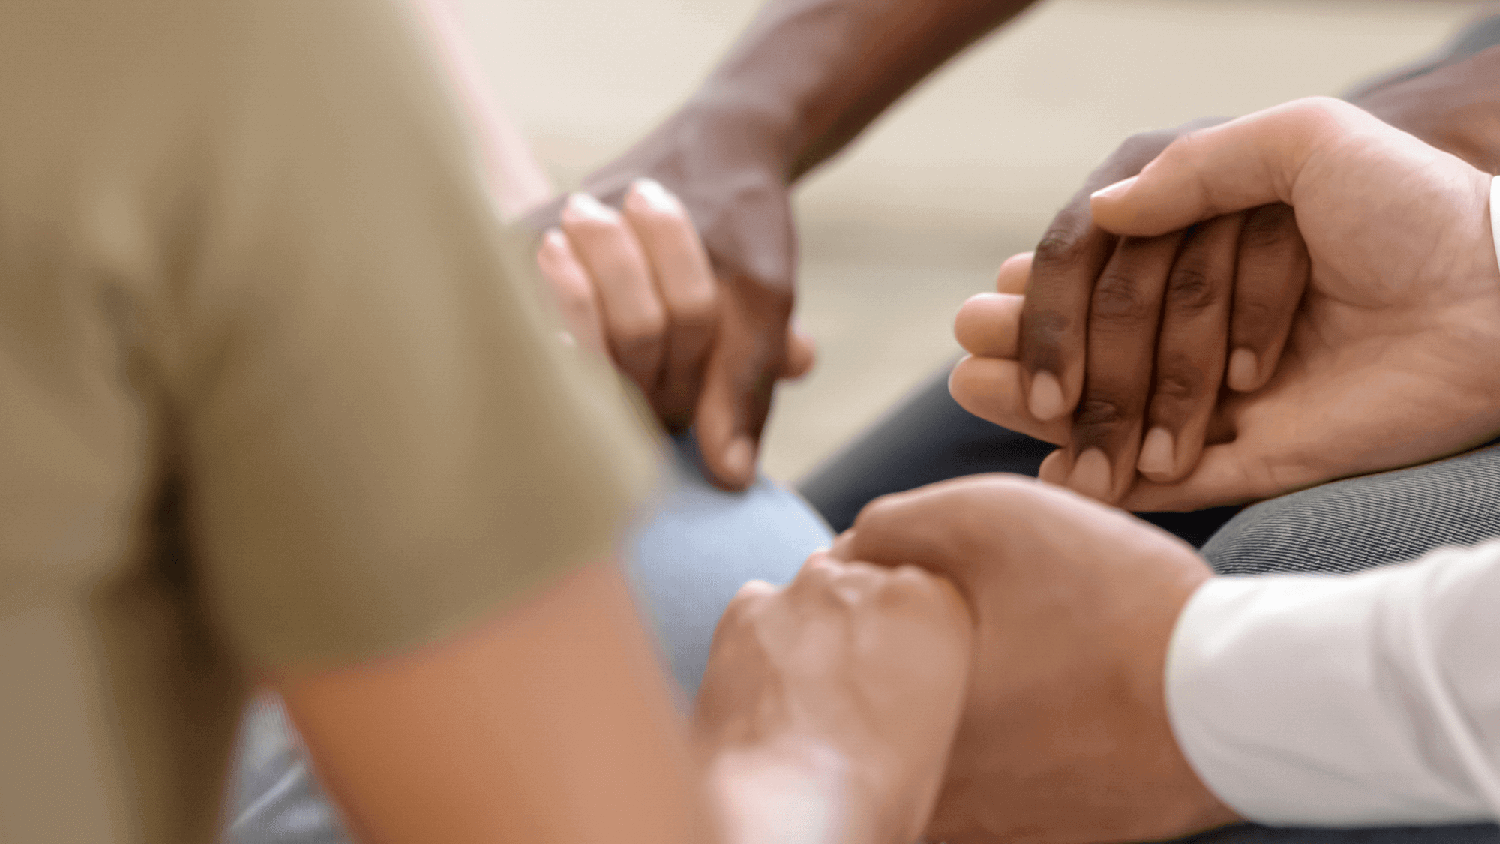 close up image of people holding each others hands and praying together